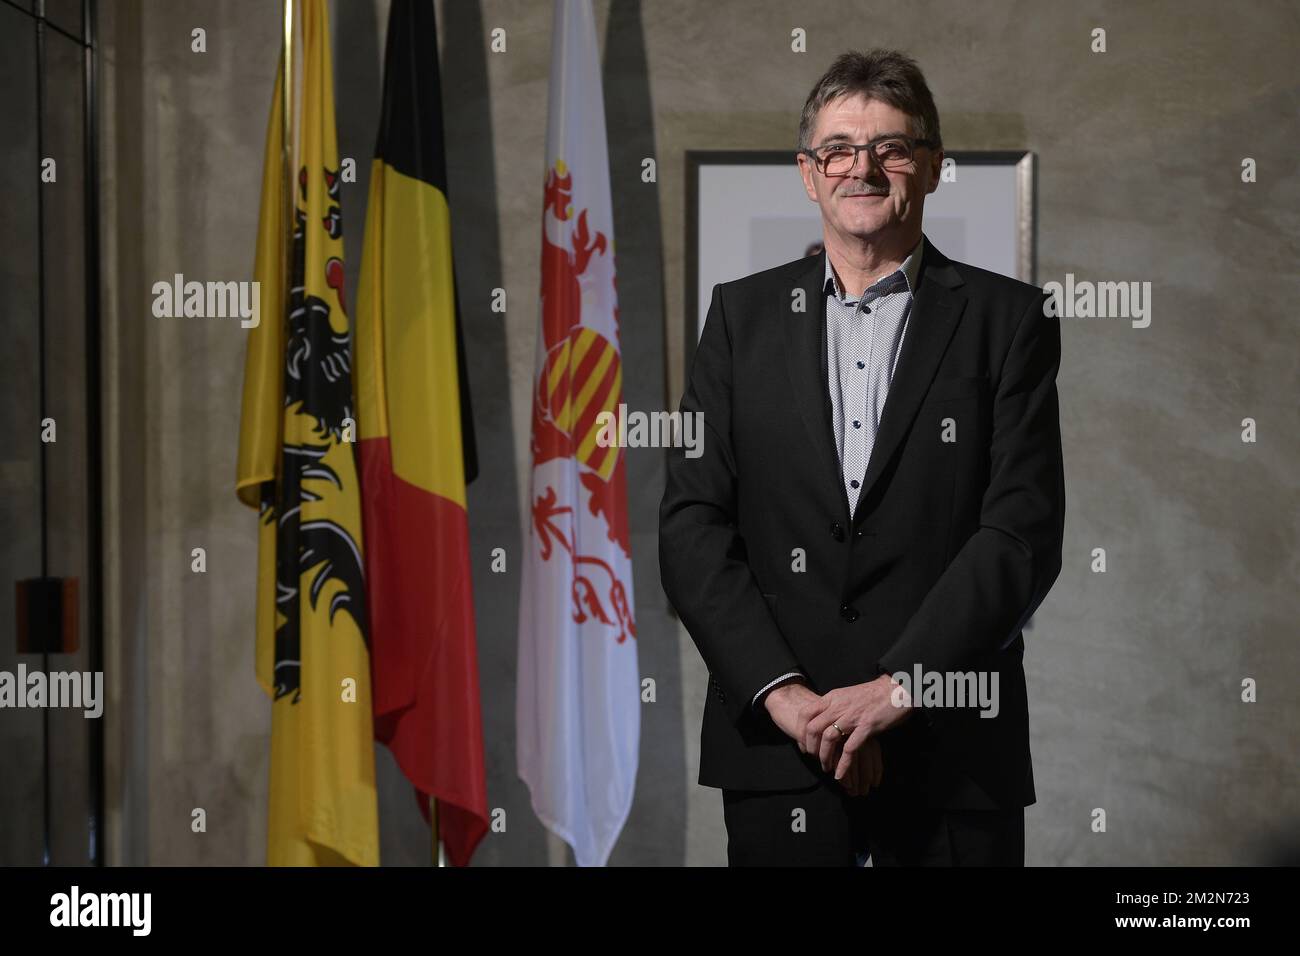 Future Herstappe mayor Leon Lowet poses for the photographer after an oath taking ceremony for the future mayors of several cities in the Limburg province, Wednesday 19 December 2018 in Hasselt. BELGA PHOTO YORICK JANSENS Stock Photo